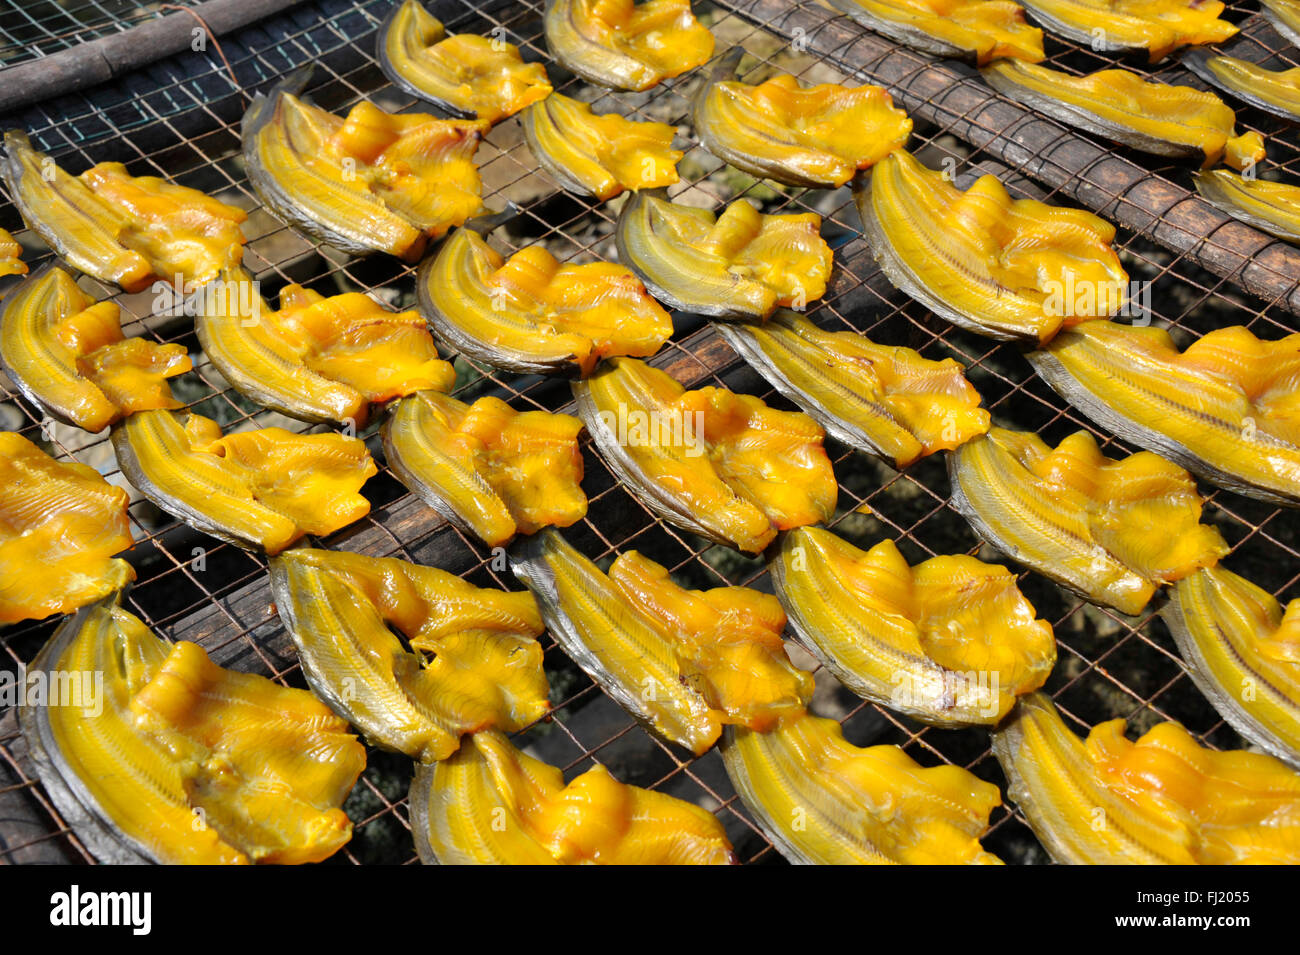 Drying fish in the sun at a market in Thailand. Stock Photo